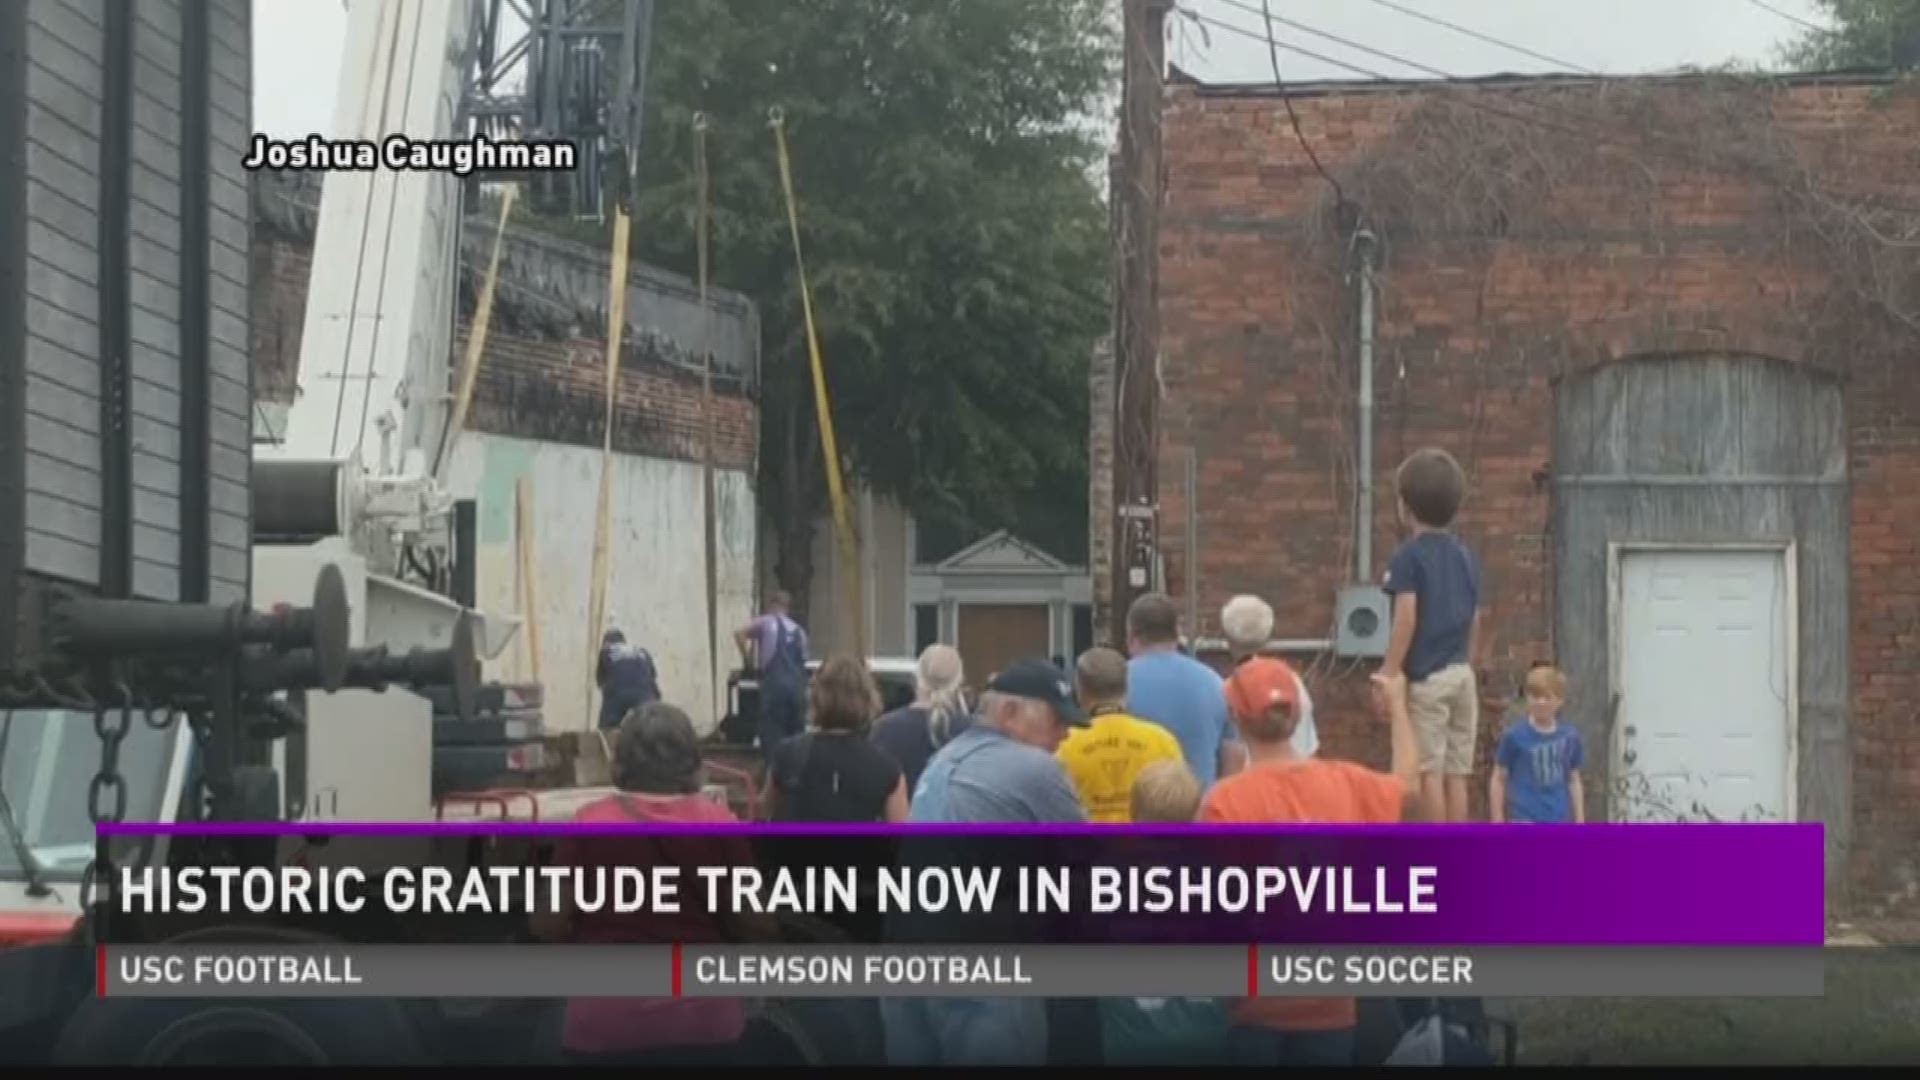 A gratitude train, with significance dating back to World War II, was delivered to Bishopville on Saturday.